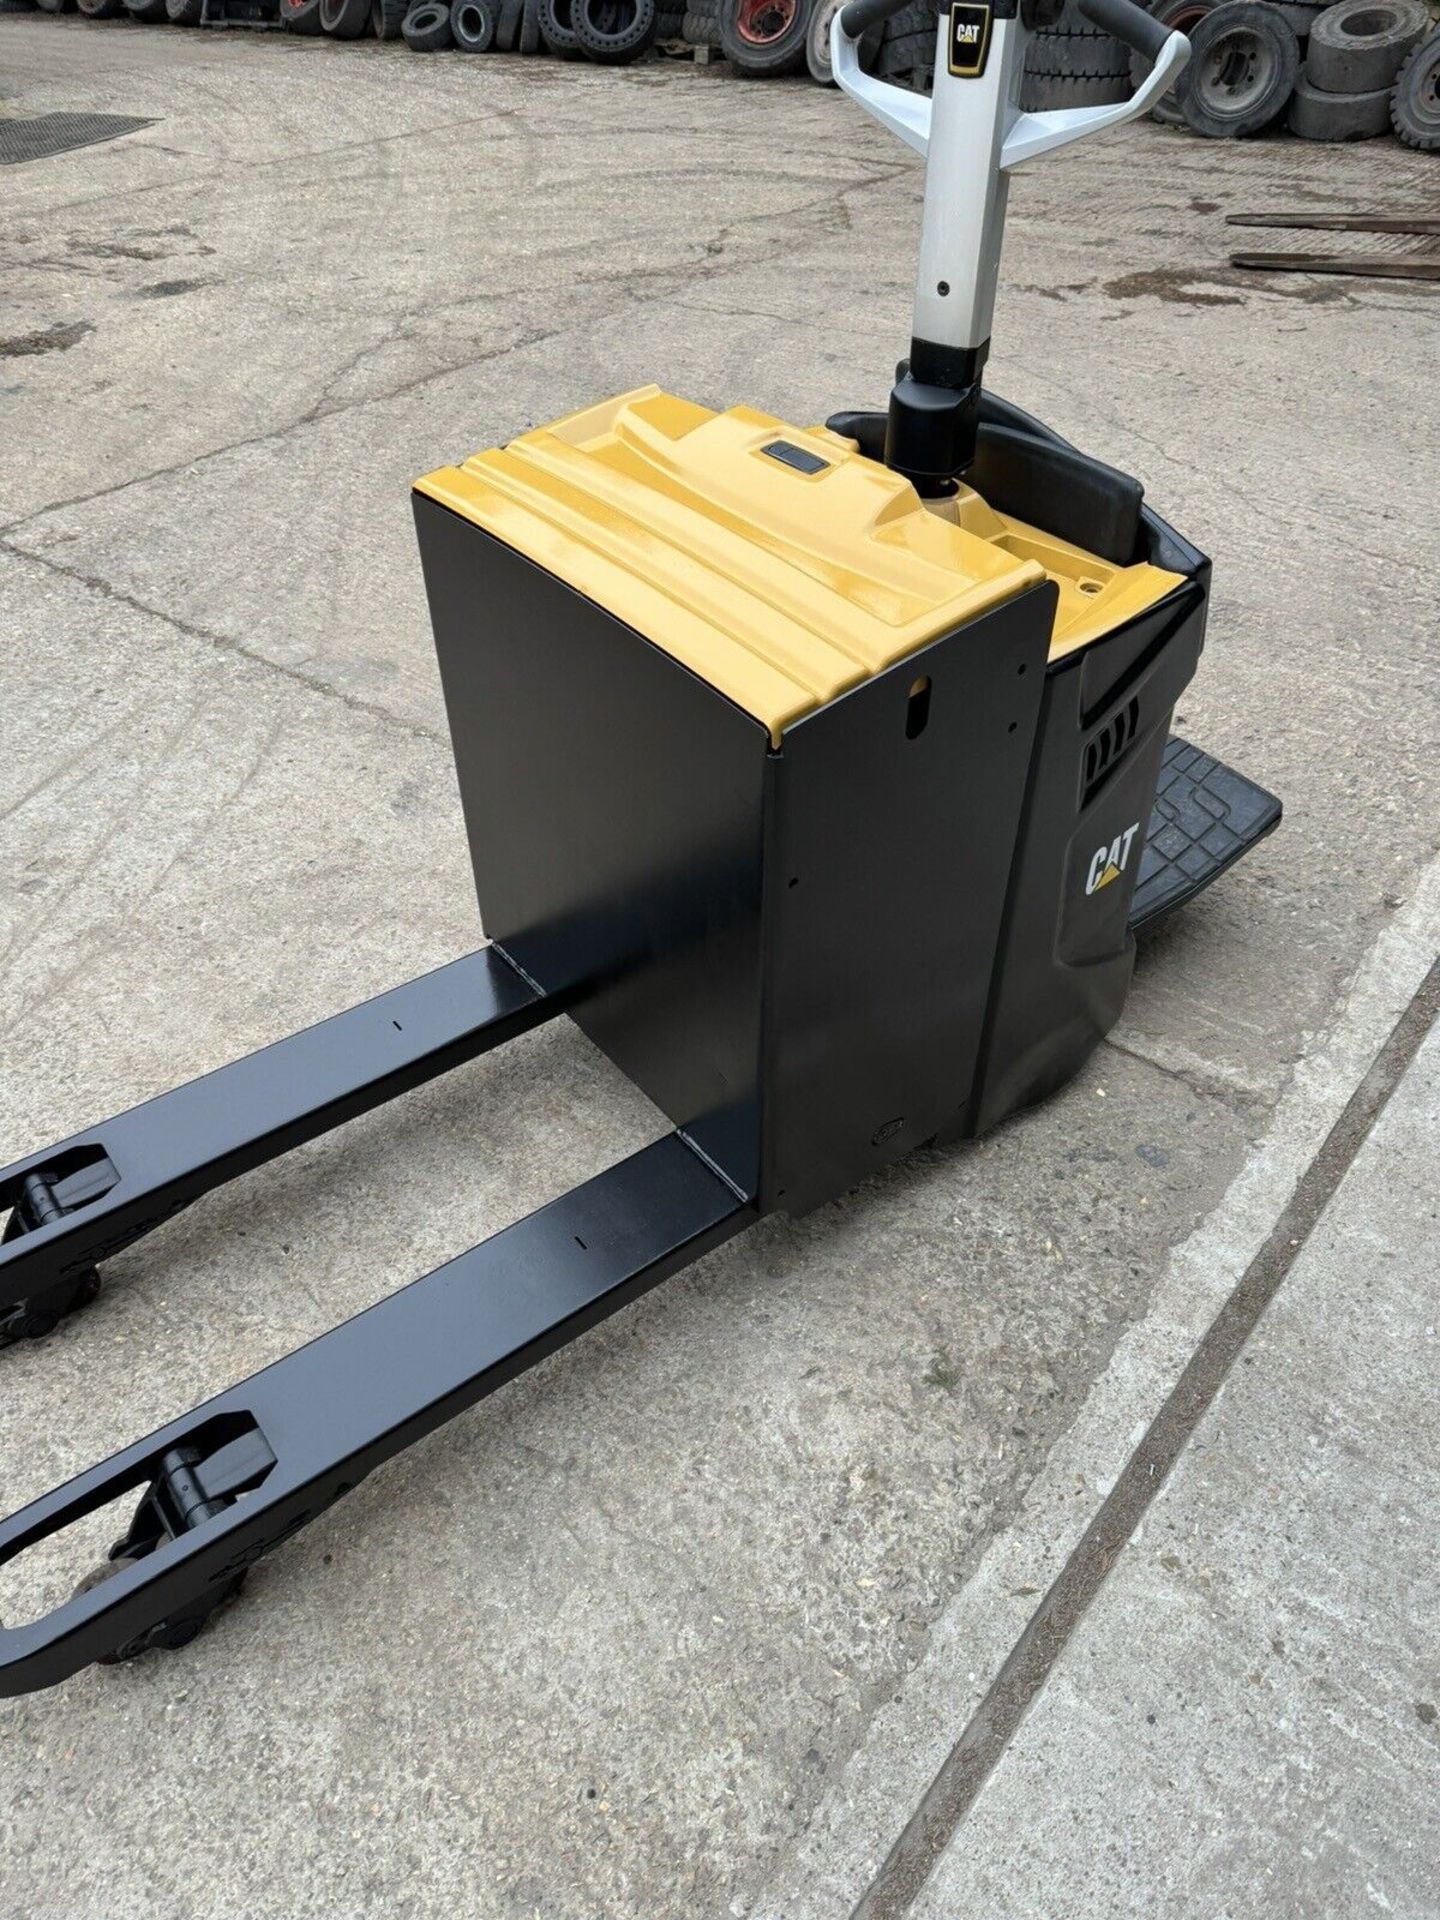 2013, CATERPILLAR 2 Electric Pallet Truck - Image 3 of 6